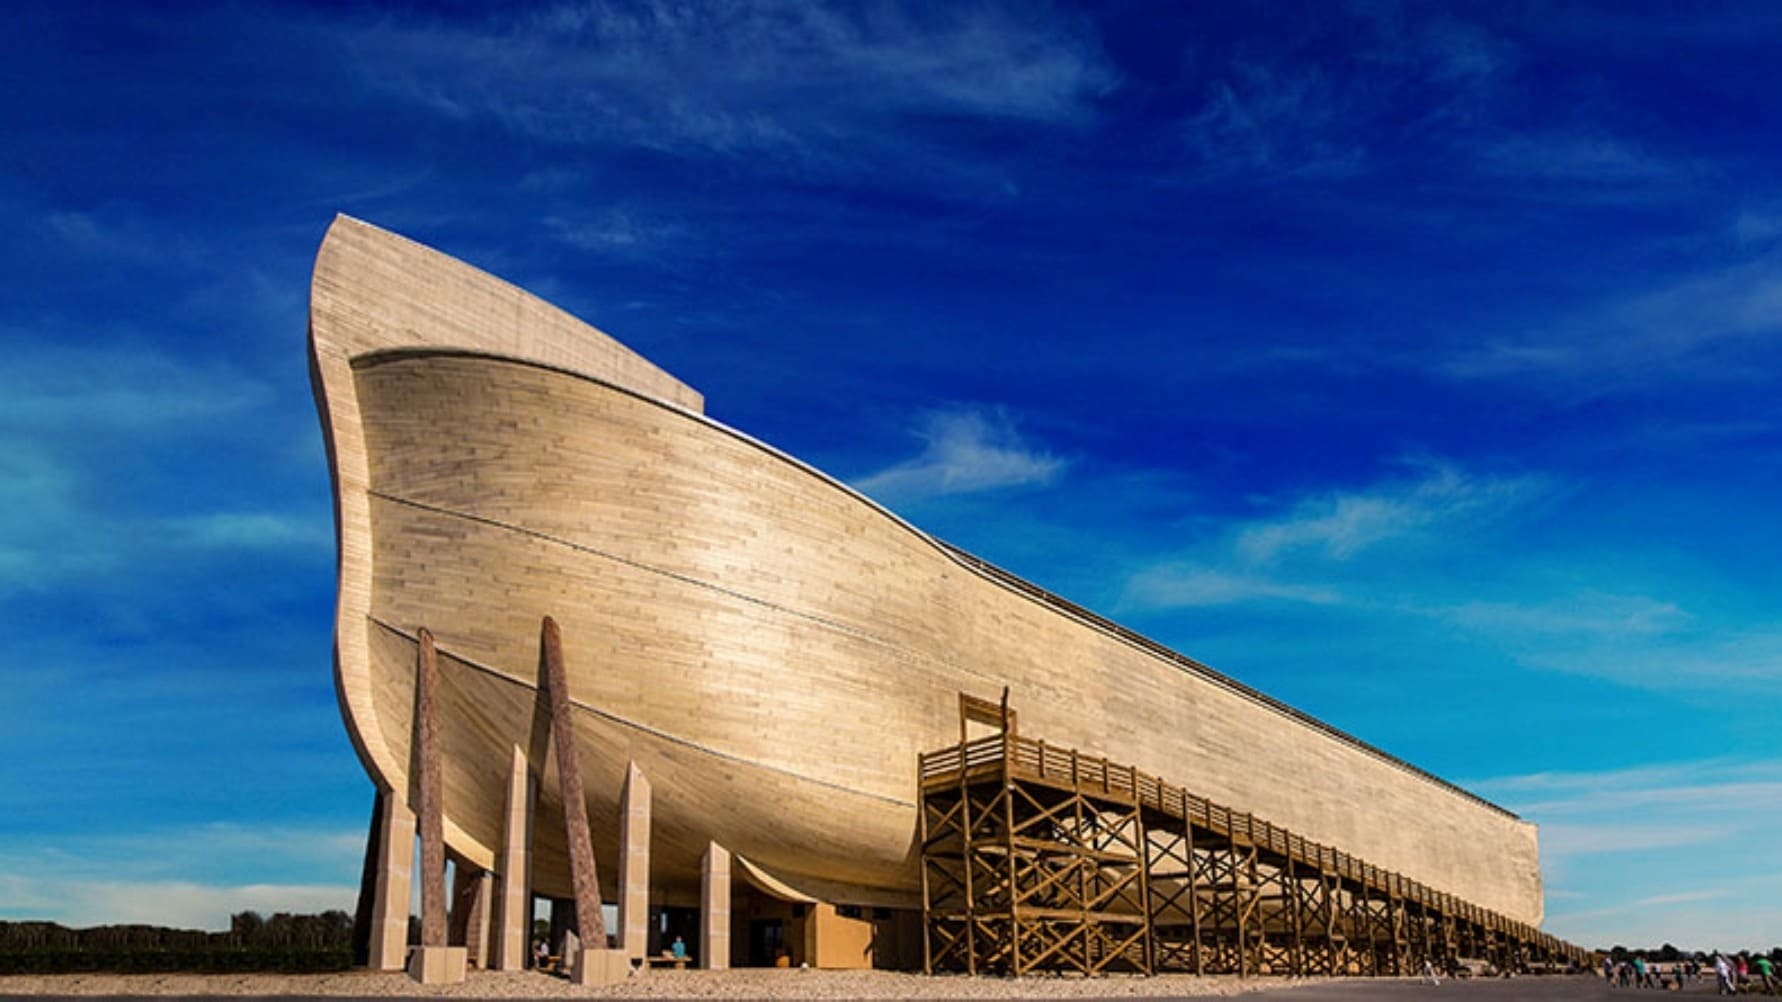 The Building of the Ark Encounter (2016)